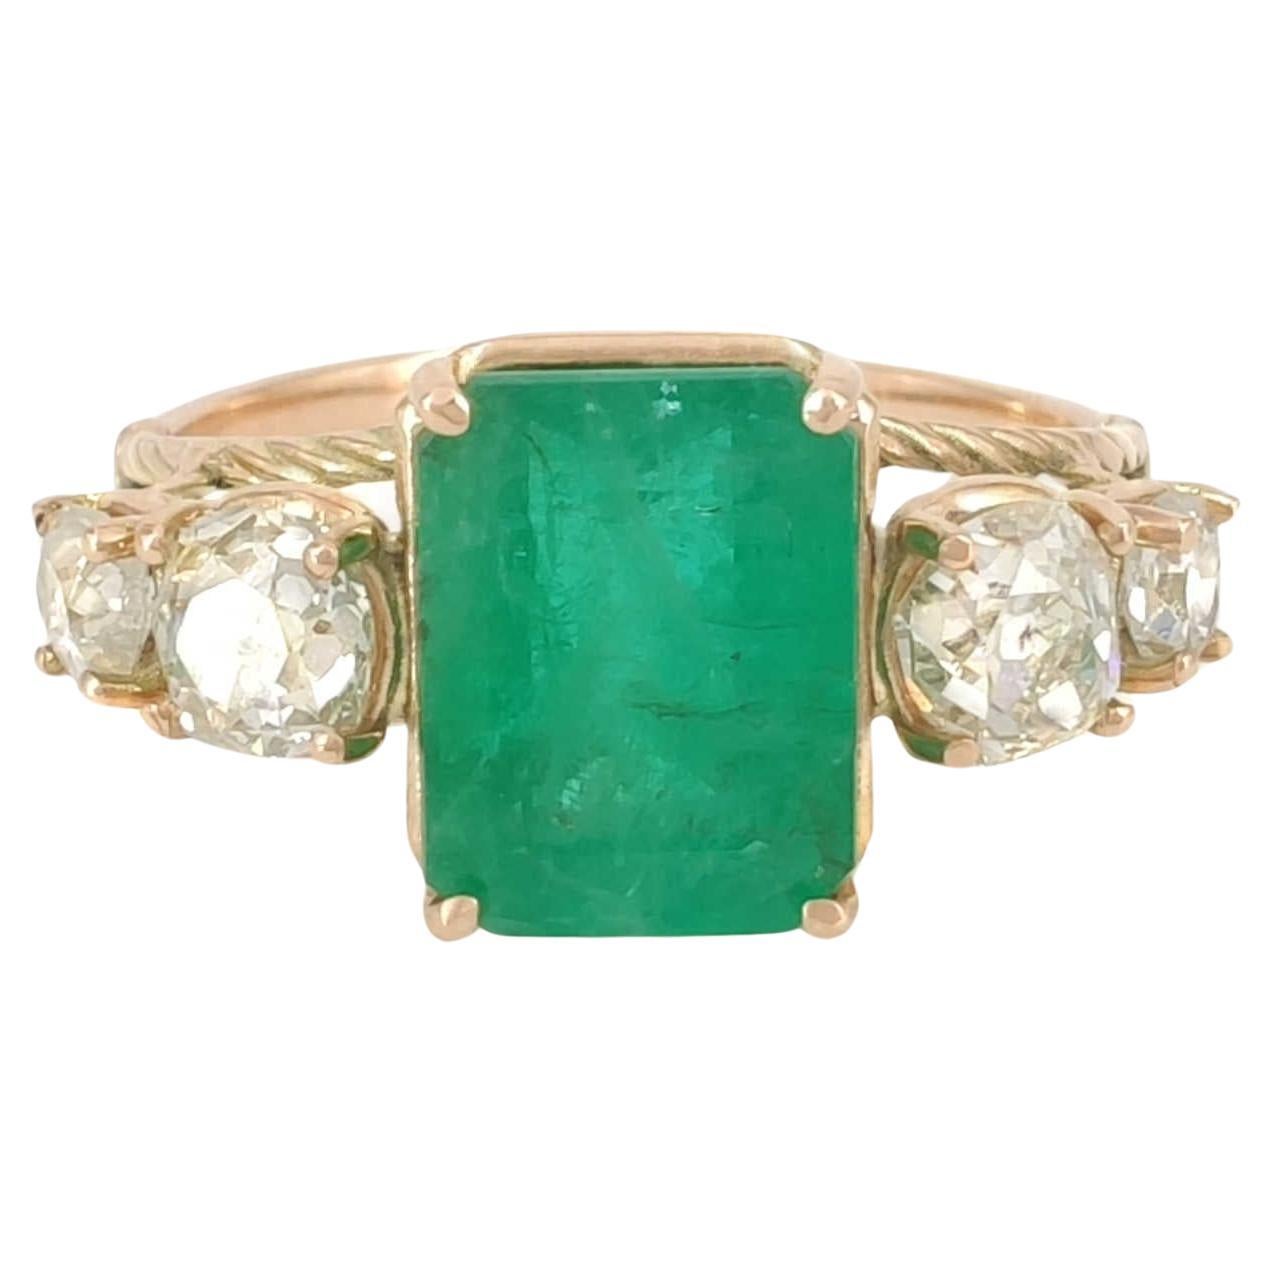 Contemporain Gemstone 14k Gold Ring Genuine Emerald Ring Diamond Coctail Ring Certified 